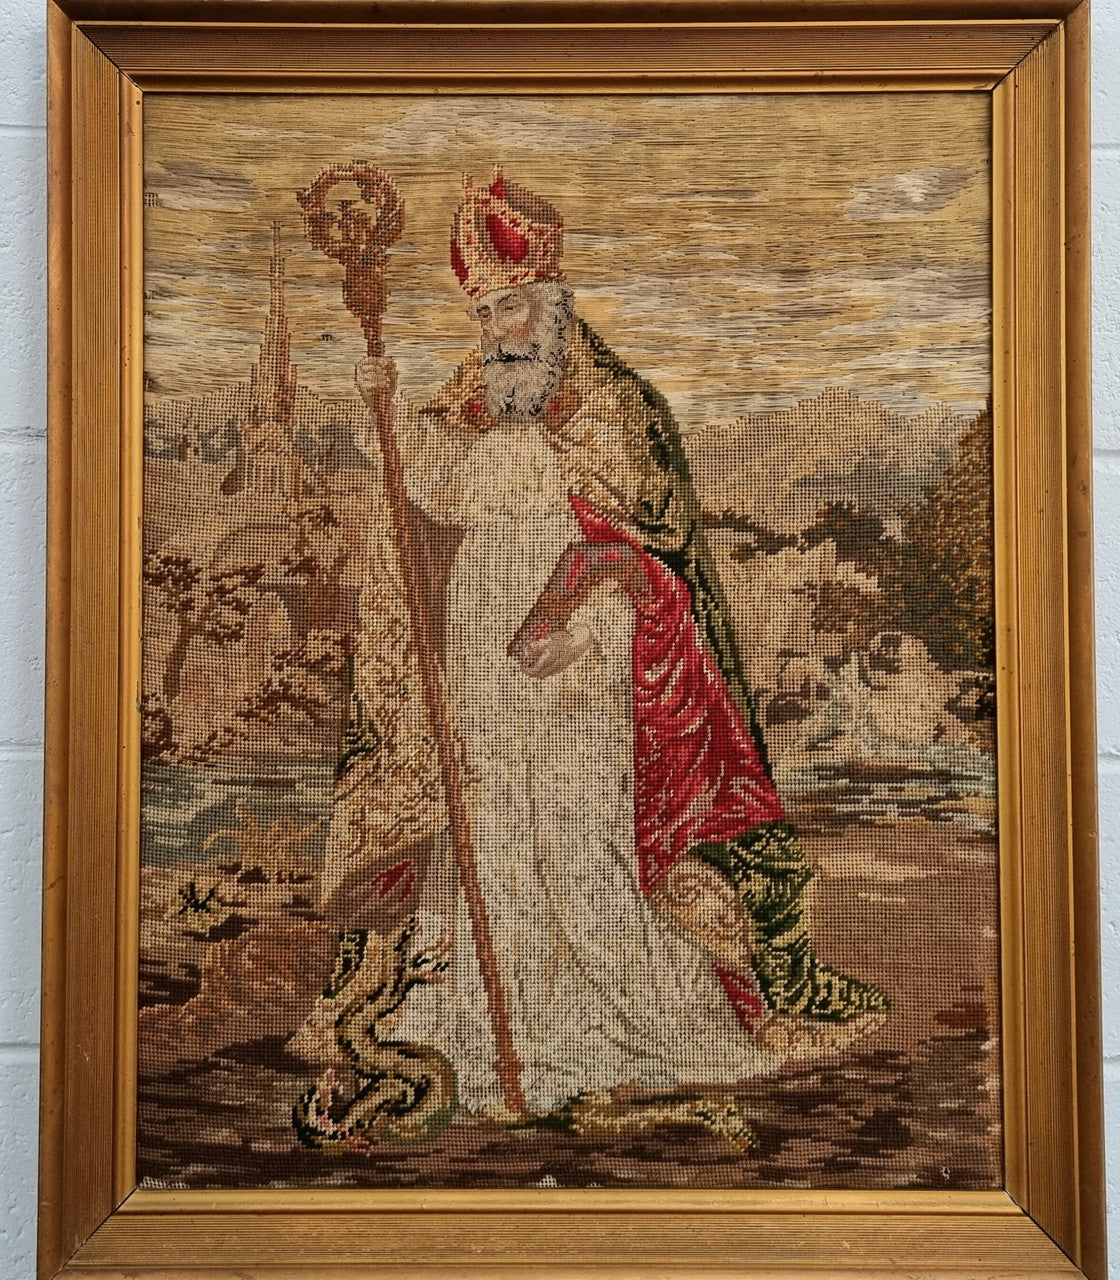 Antique Wool-Work Religious Framed Picture